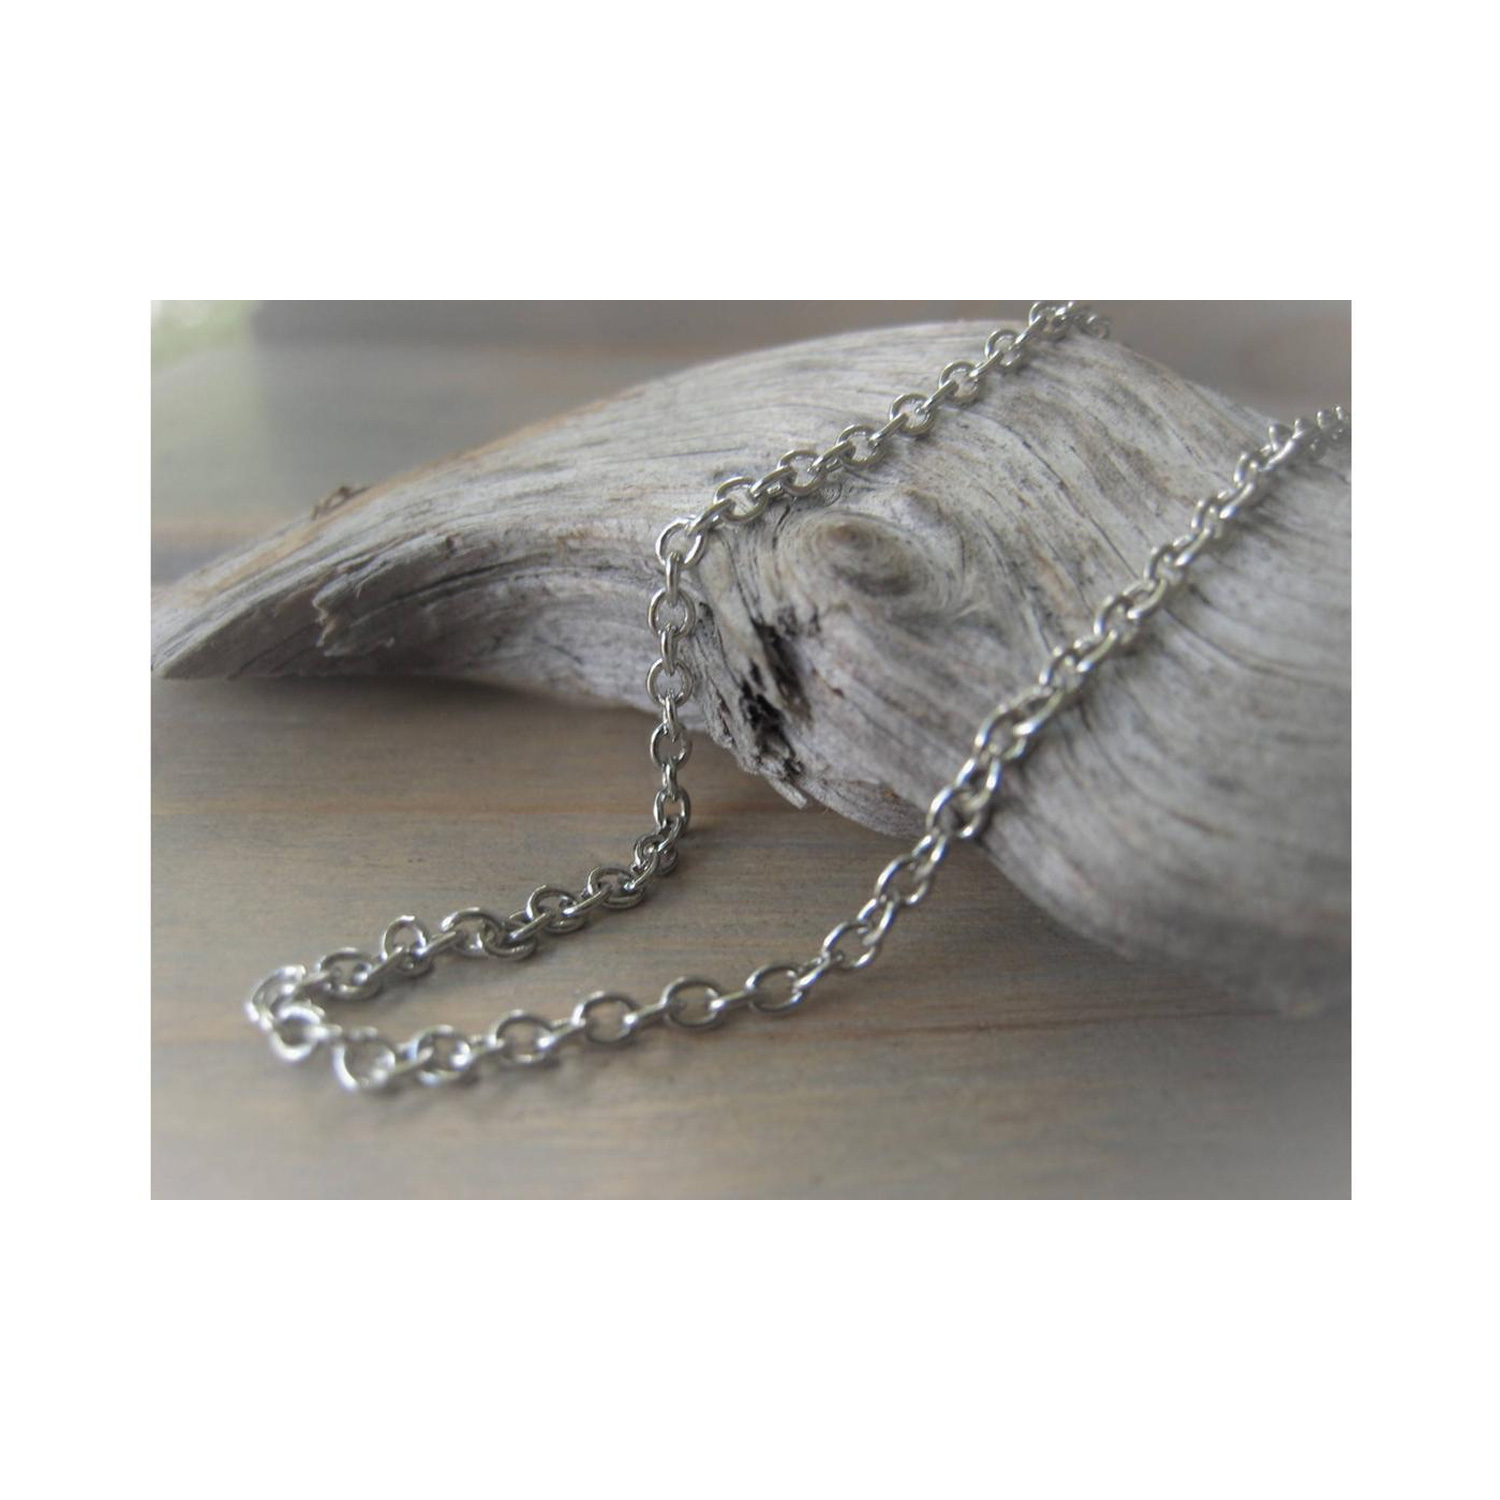 6 Piece Italian Sterling Silver Cable Chain Set